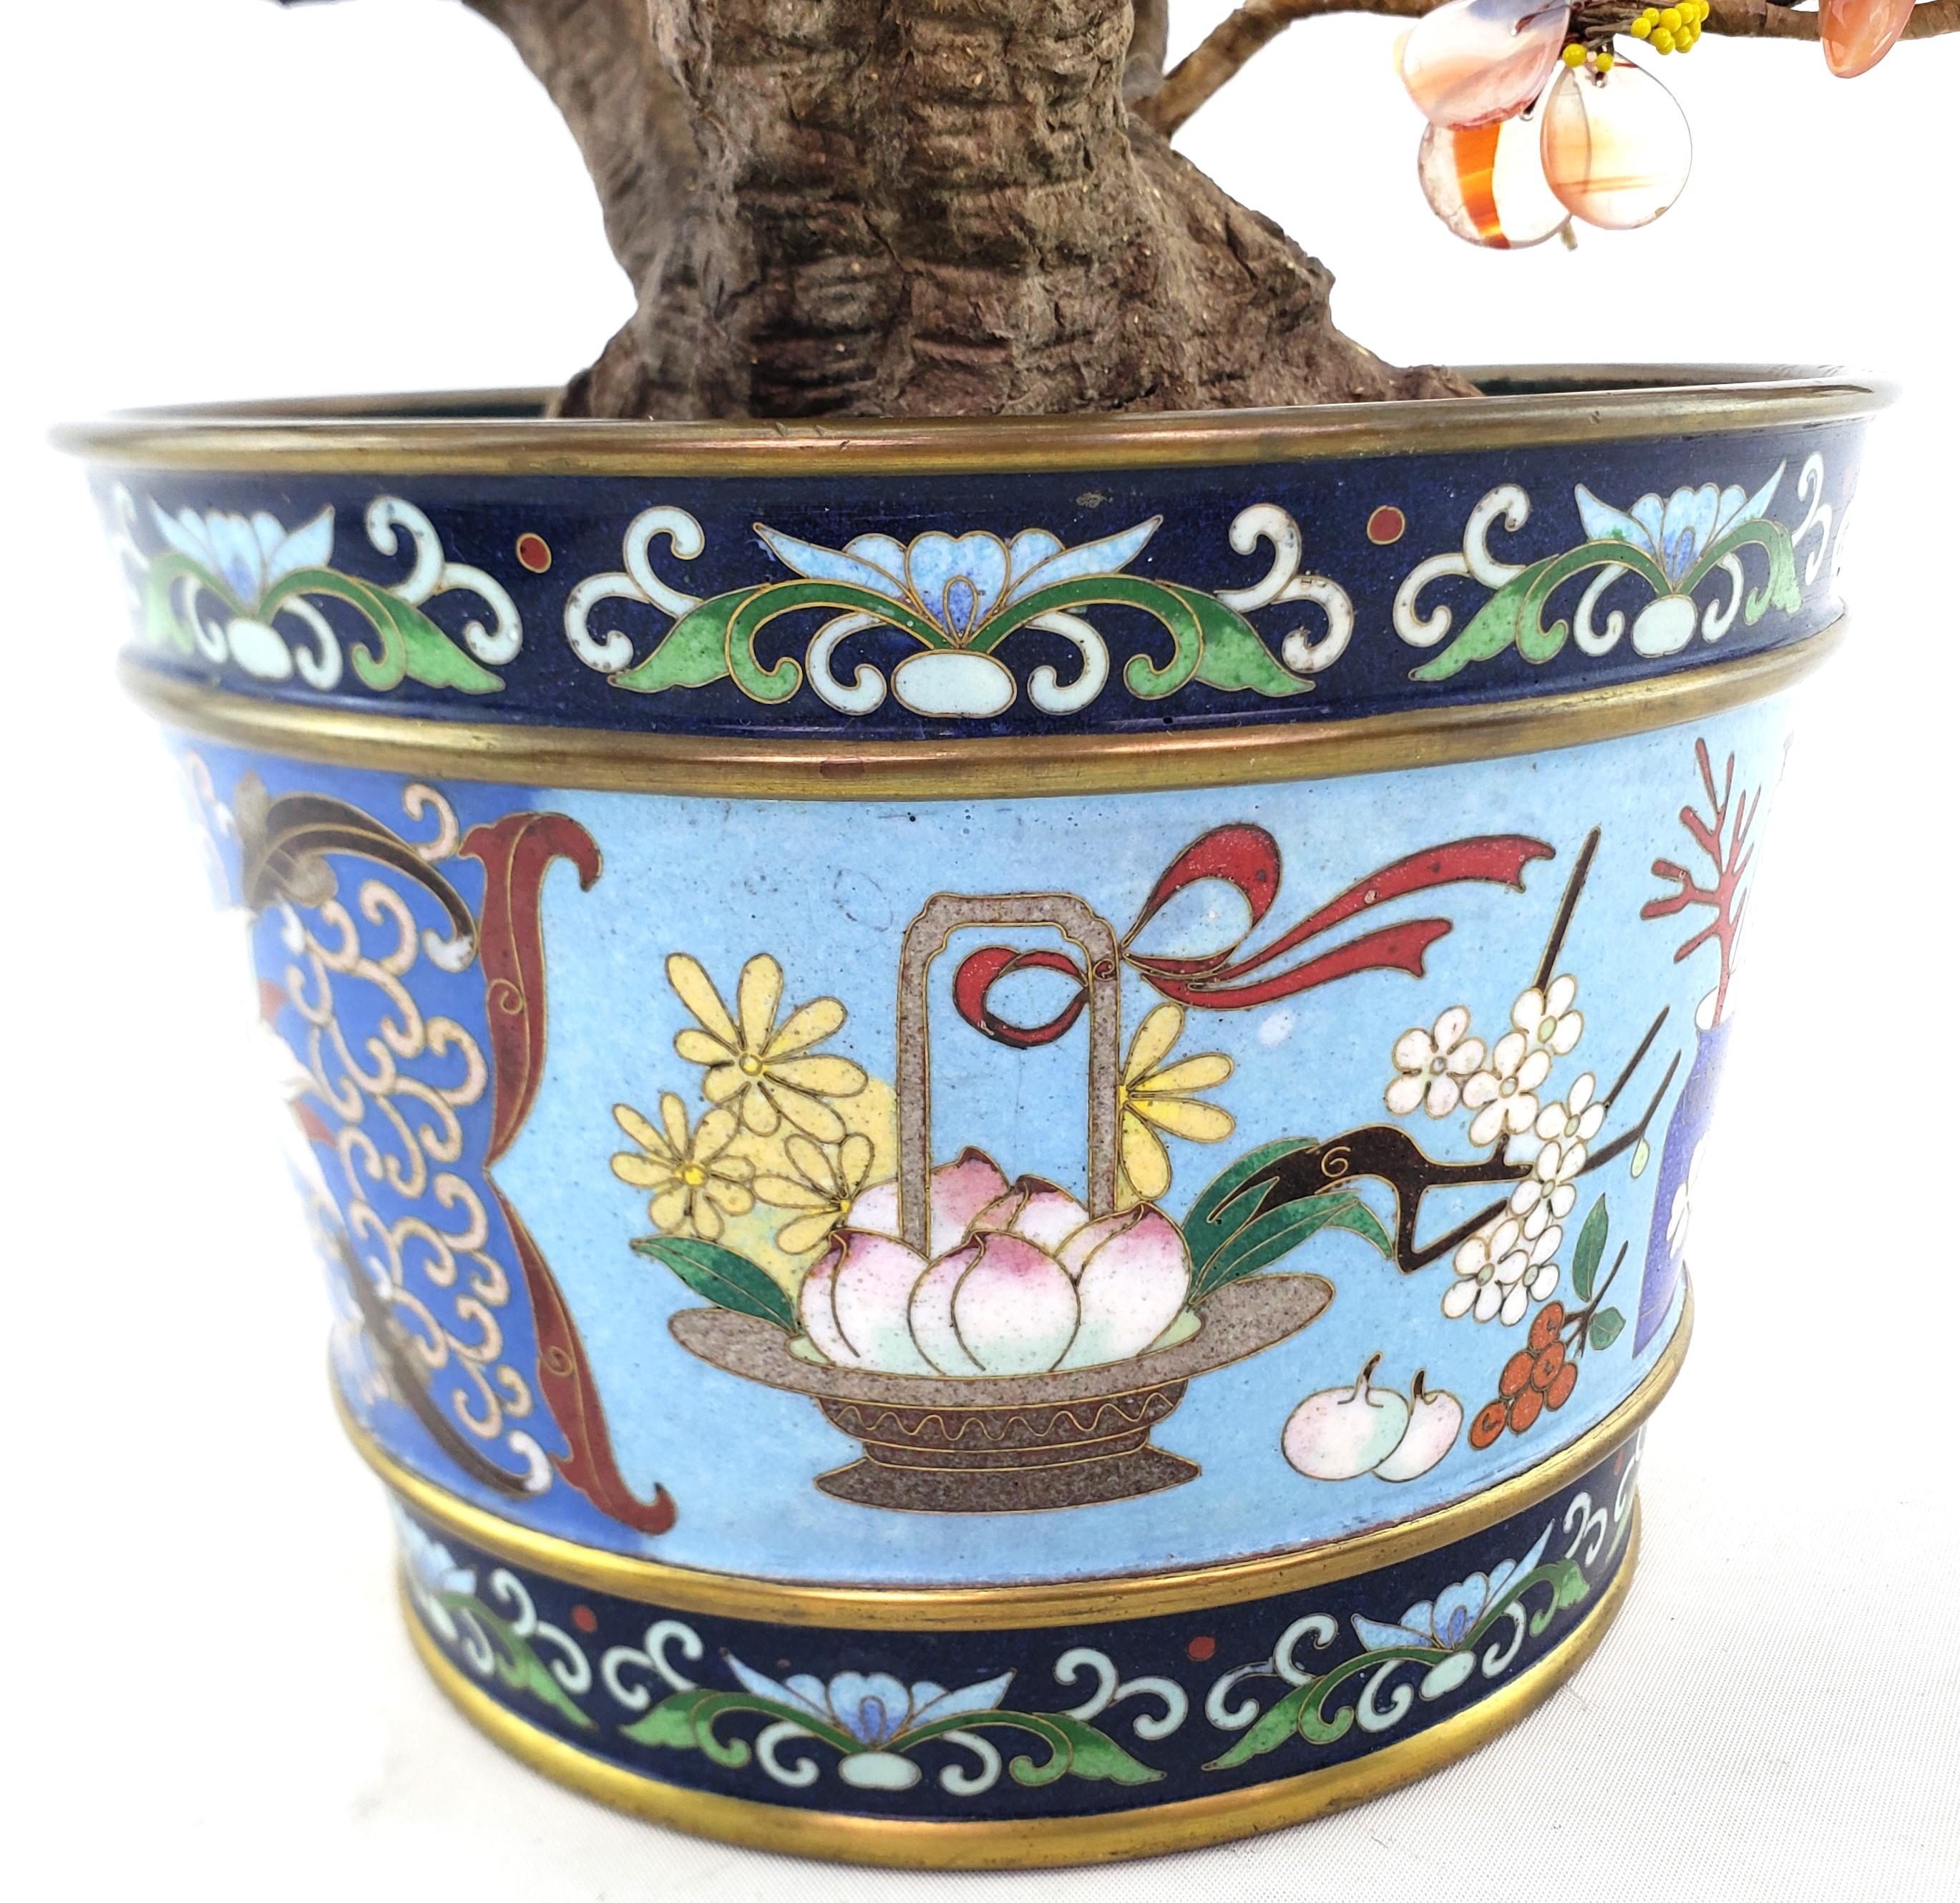 Antique Chinese Bonzai Styled Flowering Fruit Tree Sculpture with Cloisonne Pot For Sale 4